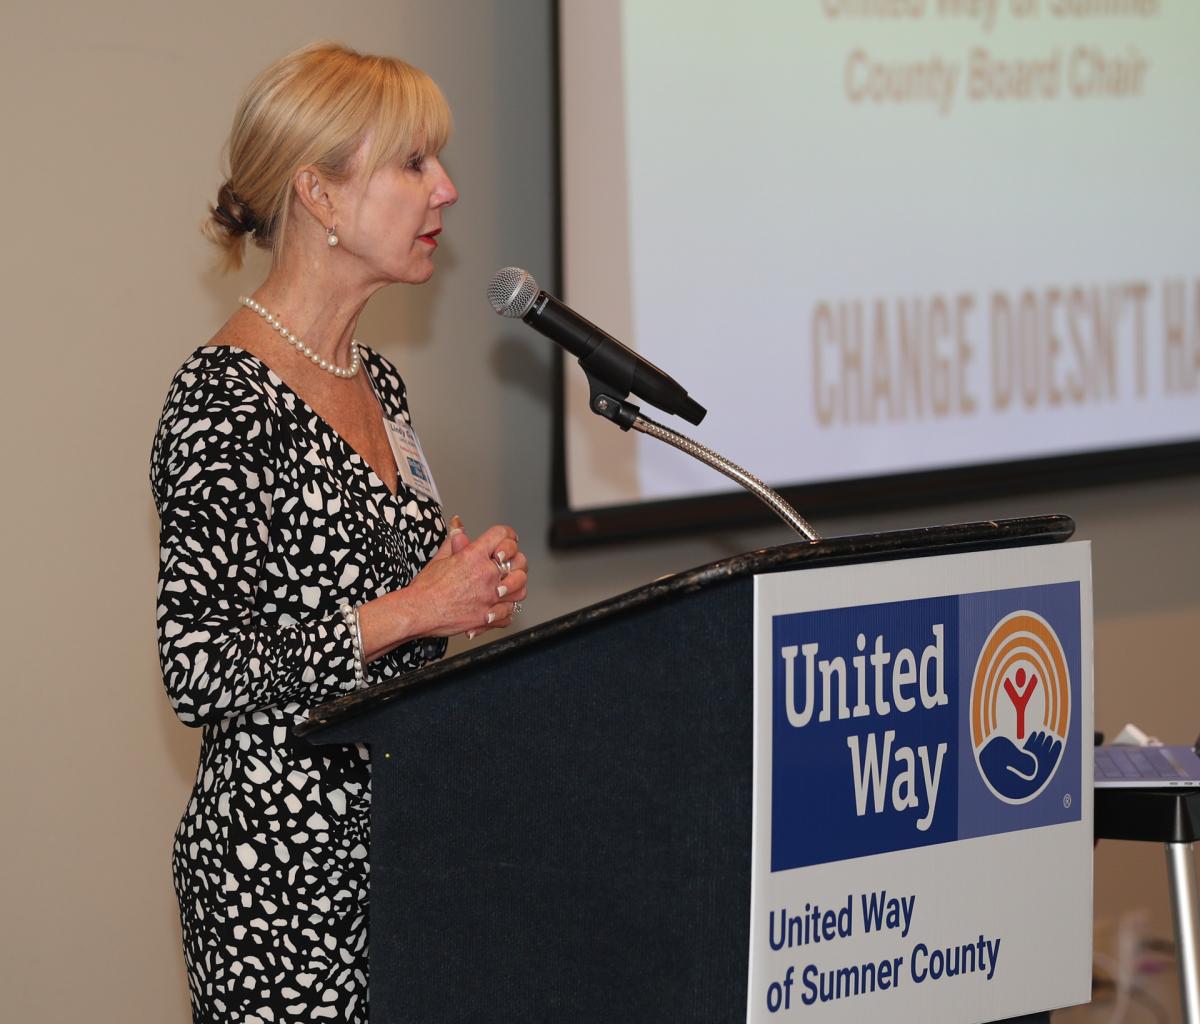 UWSC Board Chair Lindy Gaughan thanks the record-setting crowd for its help in making 2018 a great year for United Way of Sumner County.